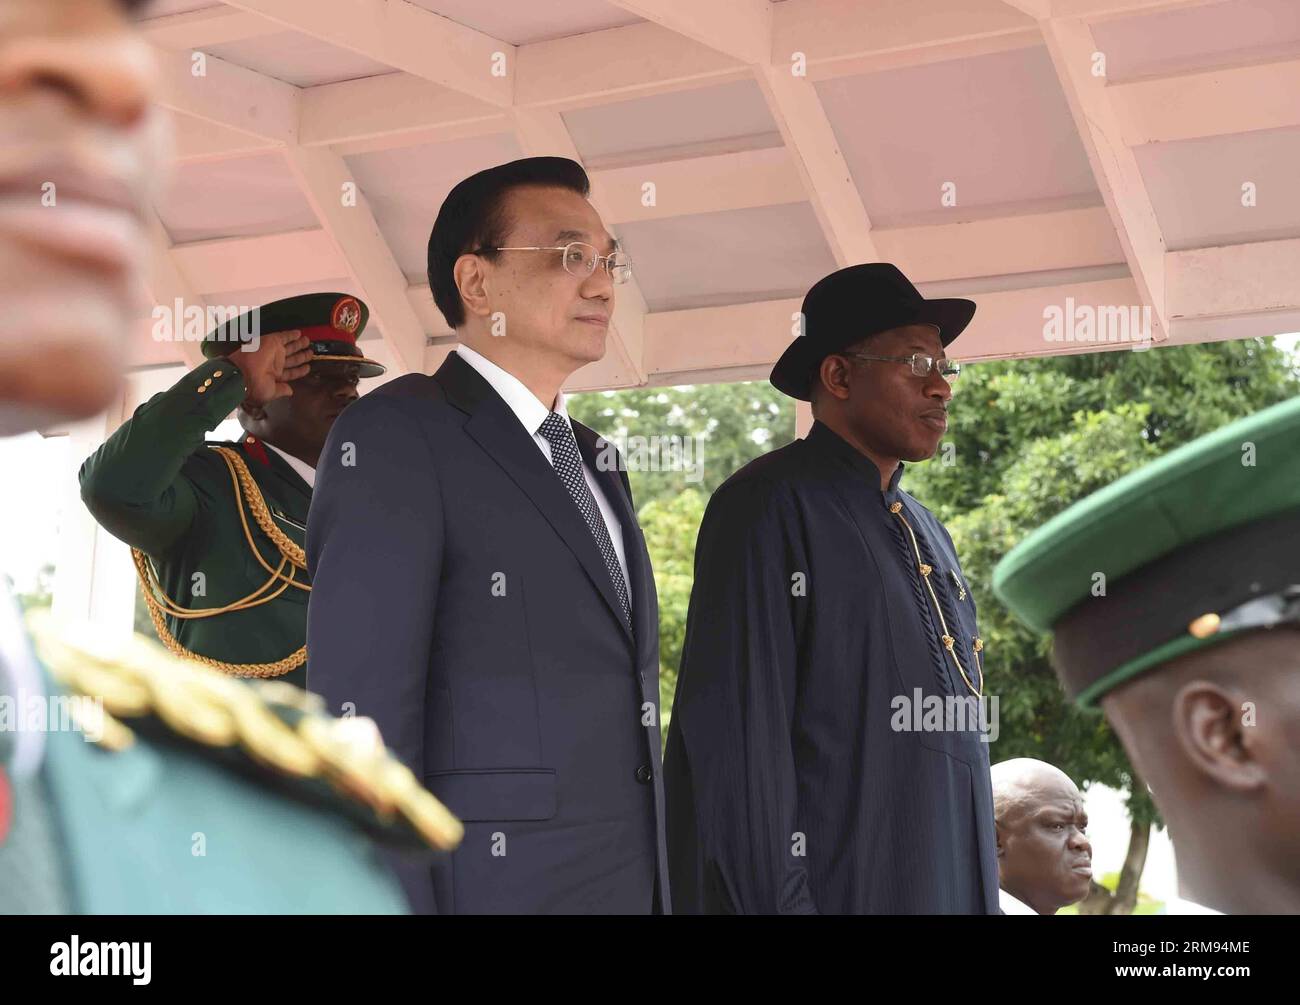 (140507) -- ABUJA, May 7, 2014 (Xinhua) -- Chinese Premier Li Keqiang (L) attends a welcoming ceremony held by Nigerian President Goodluck Jonathan in Abuja, Nigeria, May 7, 2014. (Xinhua/Li Xueren) (mp) NIGERIA-CHINA-LI KEQIANG-GOODLUCK JONATHAN-WELCOMING CEREMONY (CN) PUBLICATIONxNOTxINxCHN   Abuja May 7 2014 XINHUA Chinese Premier left Keqiang l Attends a Welcoming Ceremony Hero by Nigerian President Goodluck Jonathan in Abuja Nigeria May 7 2014 XINHUA left Xueren MP Nigeria China left Keqiang Goodluck Jonathan Welcoming Ceremony CN PUBLICATIONxNOTxINxCHN Stock Photo